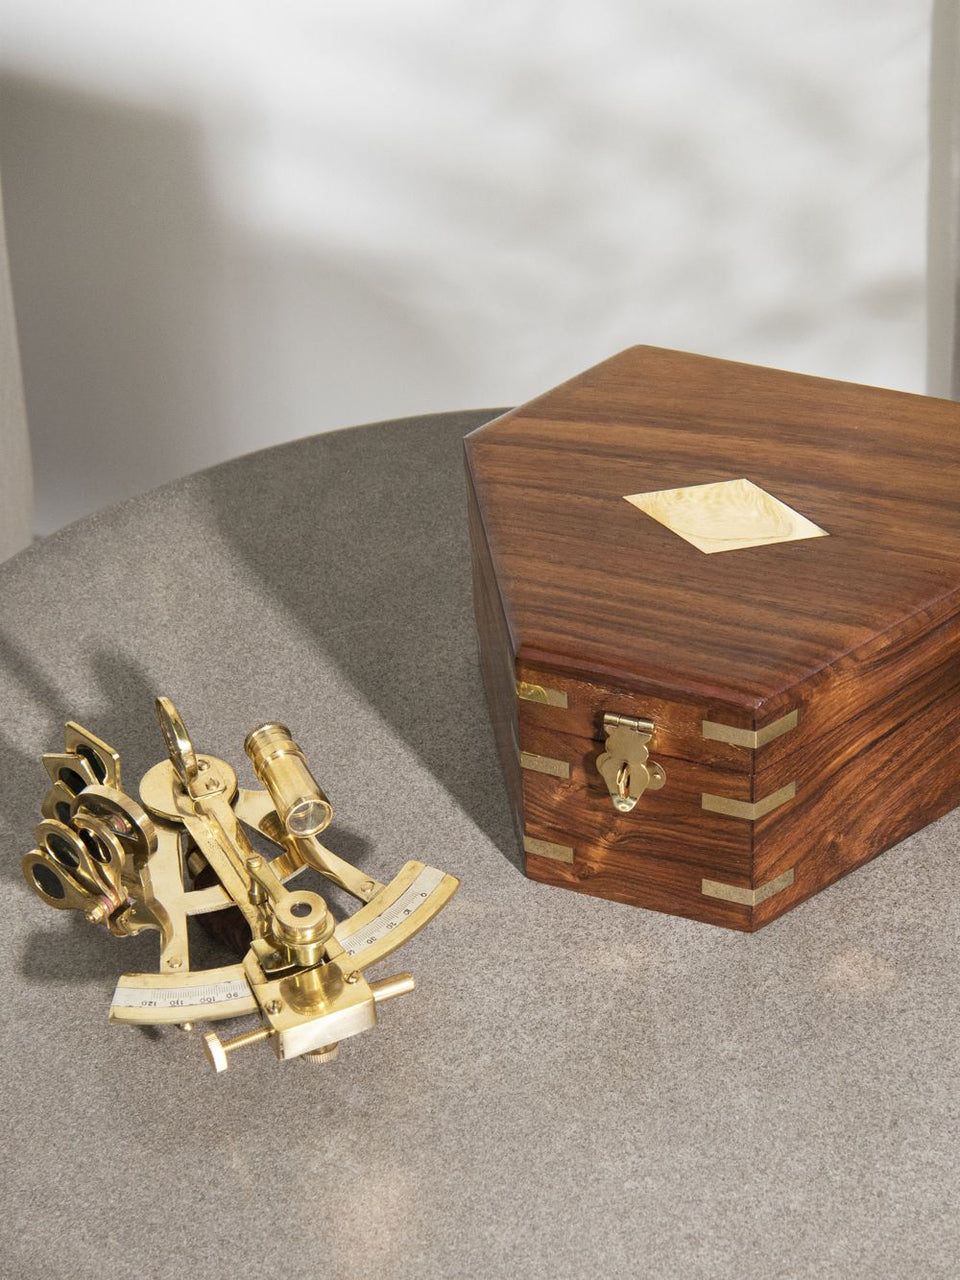 Wooden Box with Sextant